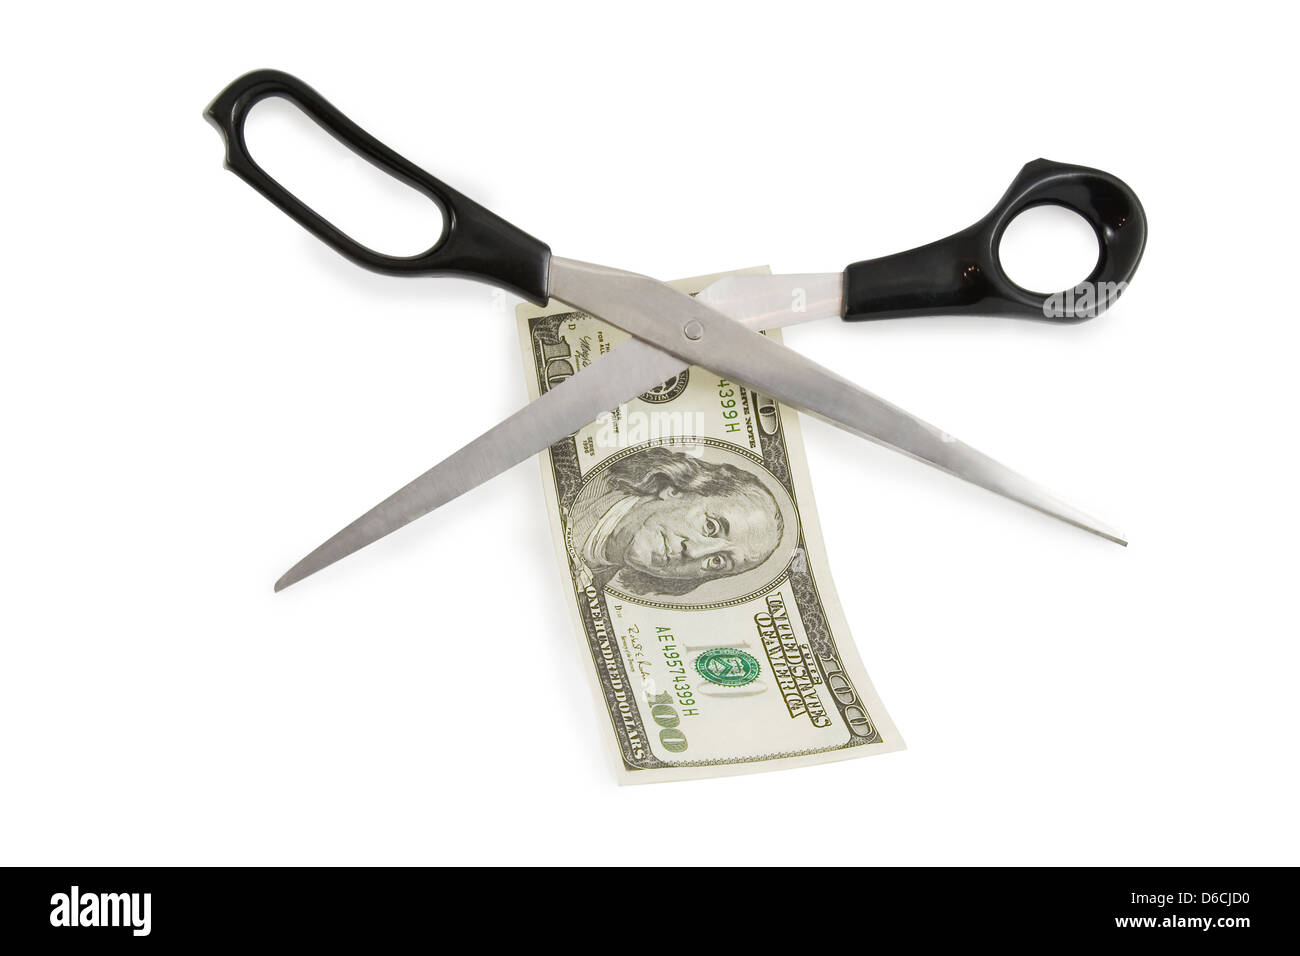 scissors cutting a 100 dollars banknote Stock Photo